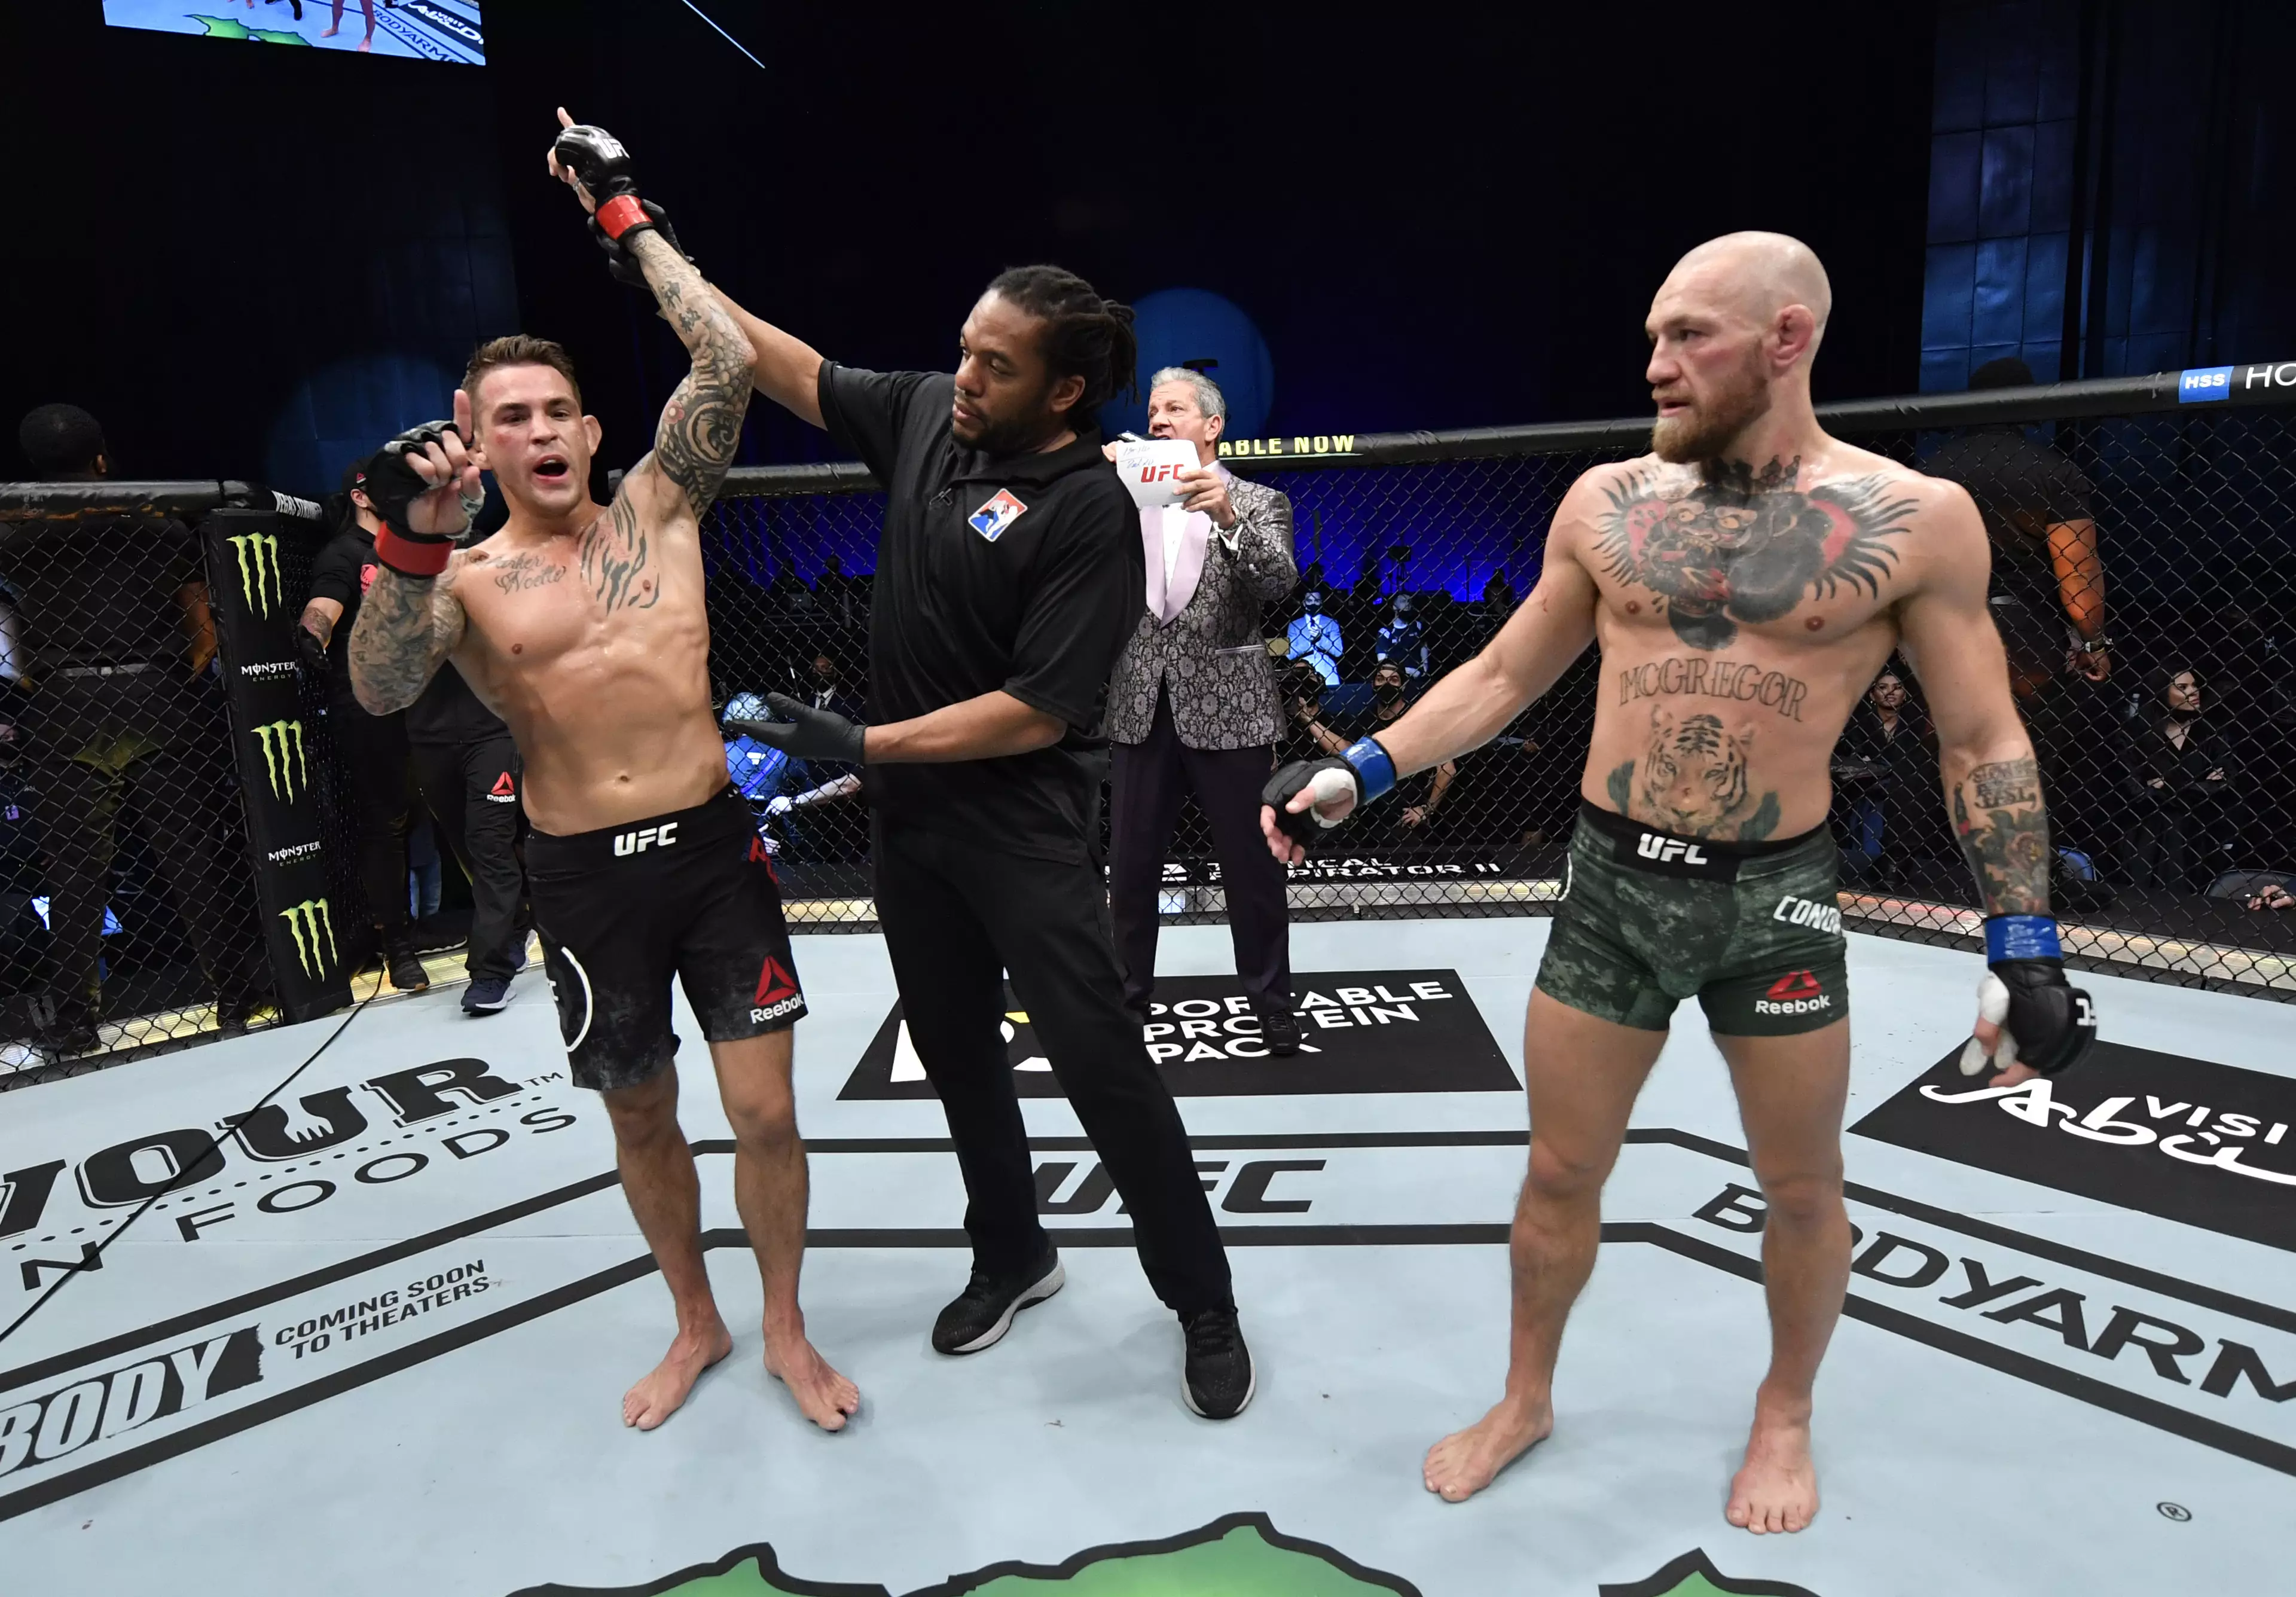 Despite losing, McGregor still takes home a small fortune. Image: PA Images